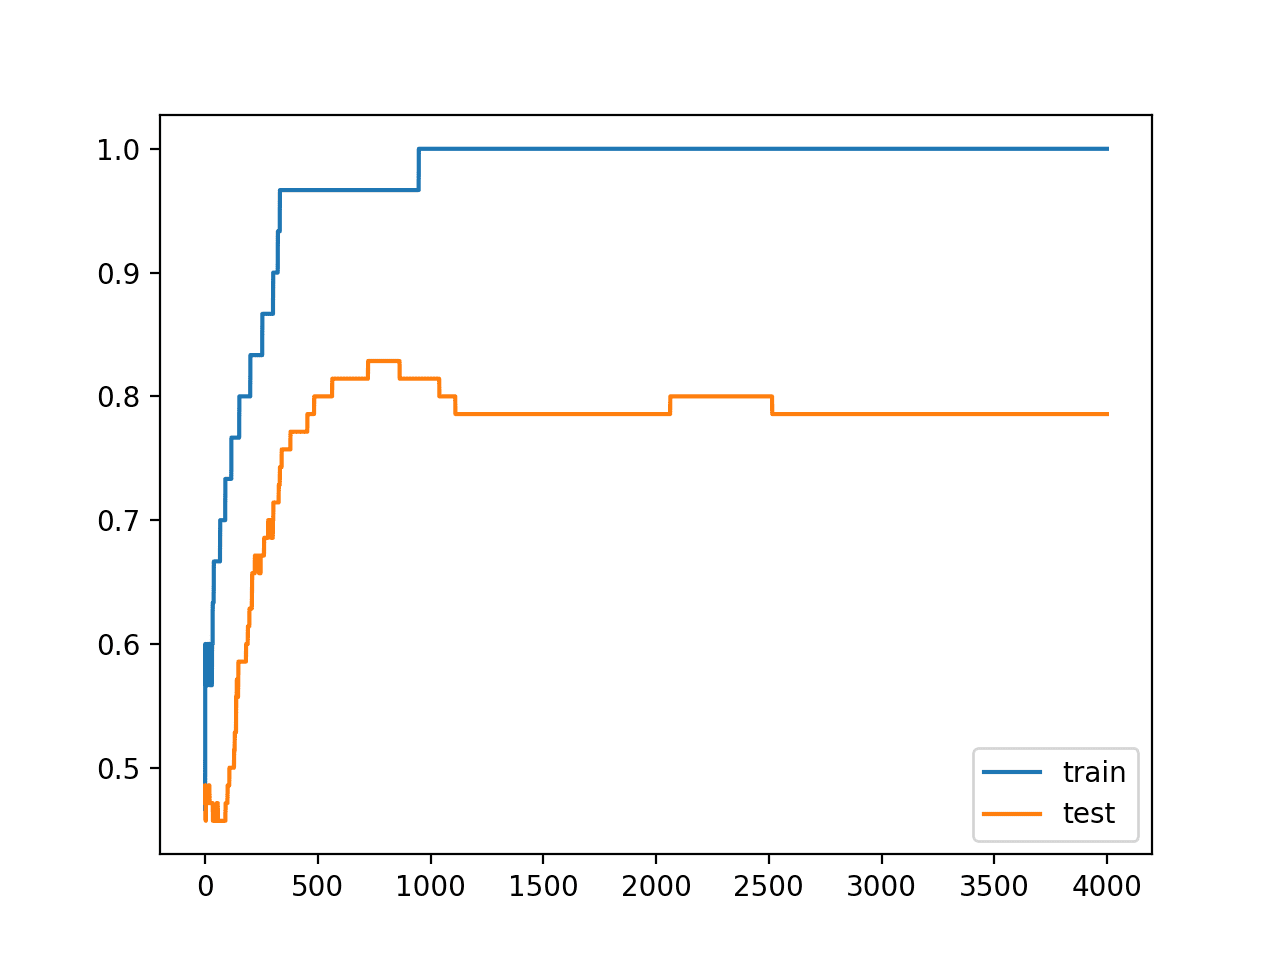 Line Plots of Accuracy on Train and Test Datasets While Training Showing an Overfit